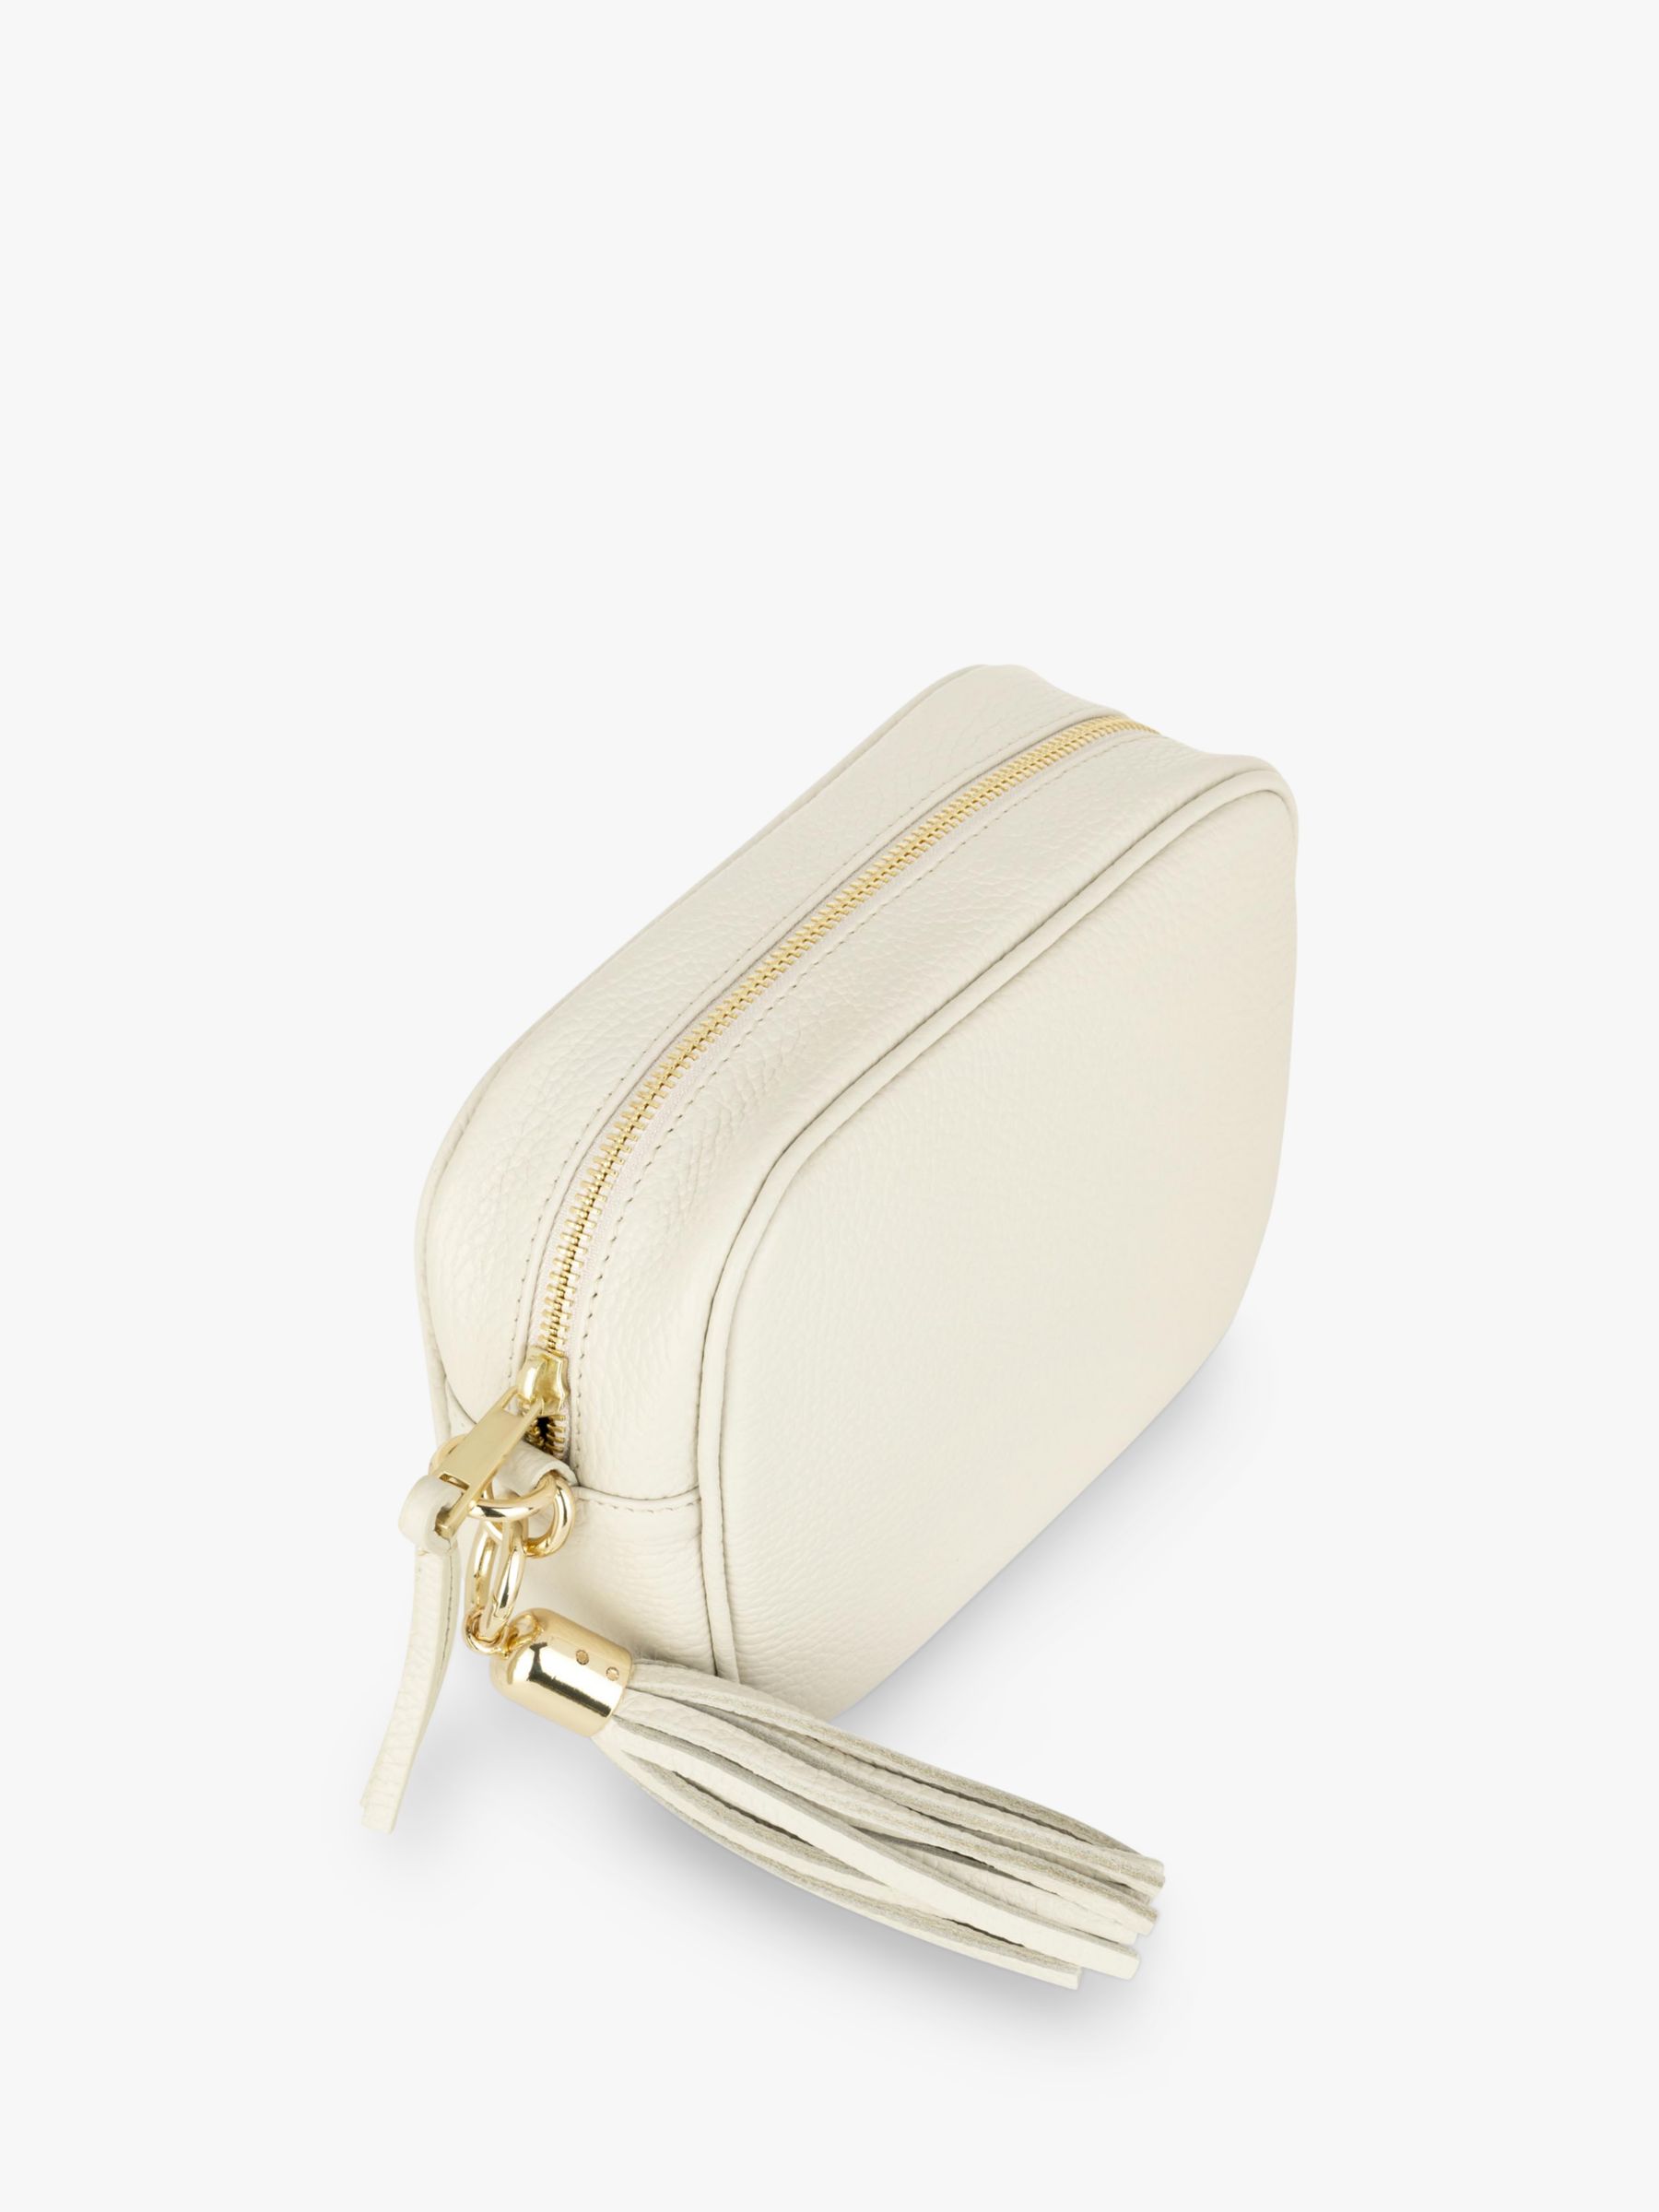 Buy Apatchy Zigzag Strap Leather Crossbody Bag Online at johnlewis.com